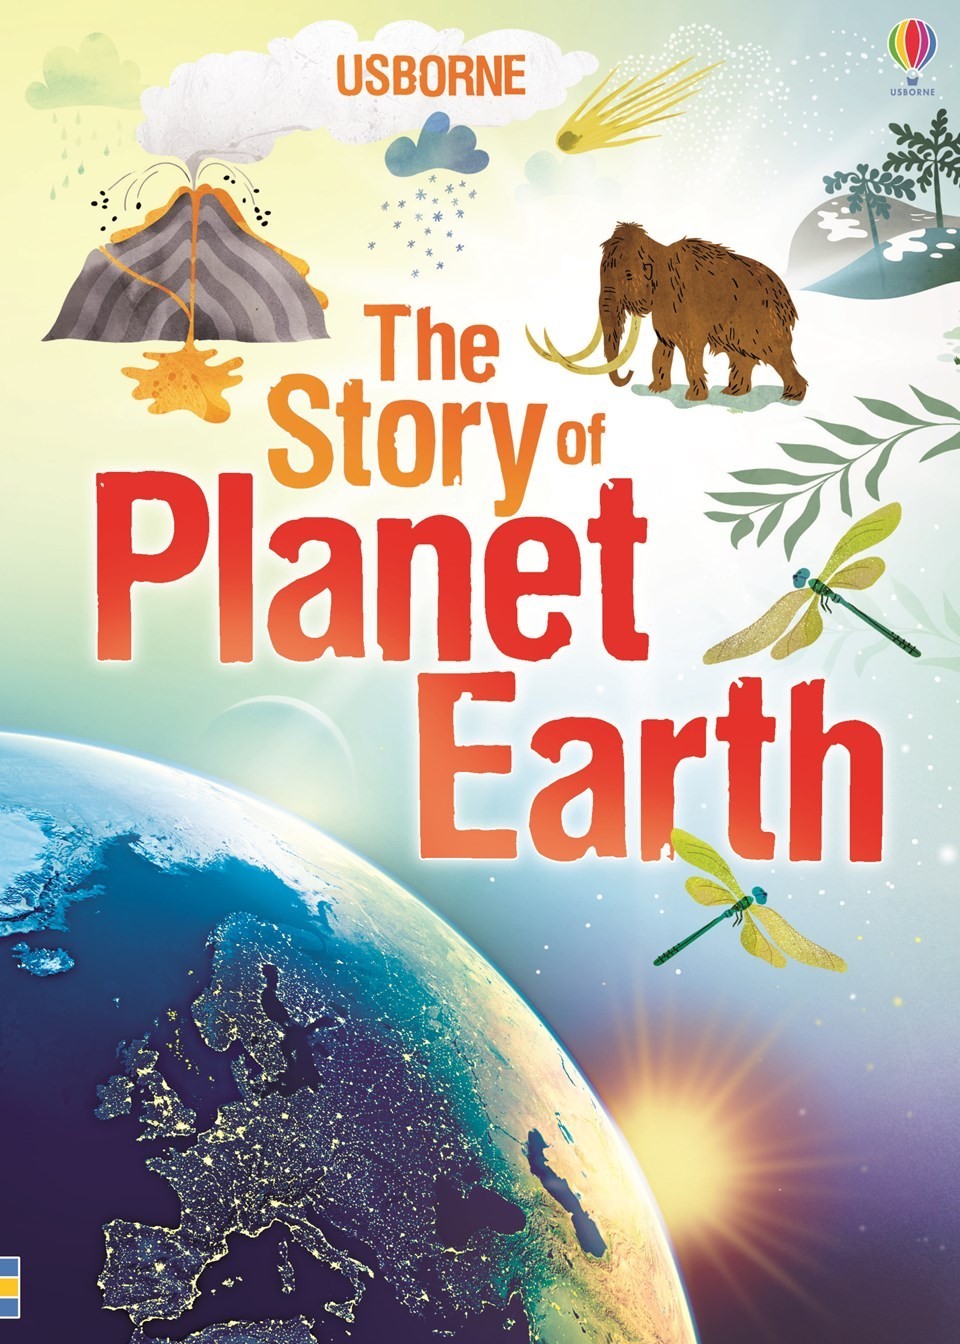 The story of Planet Earth